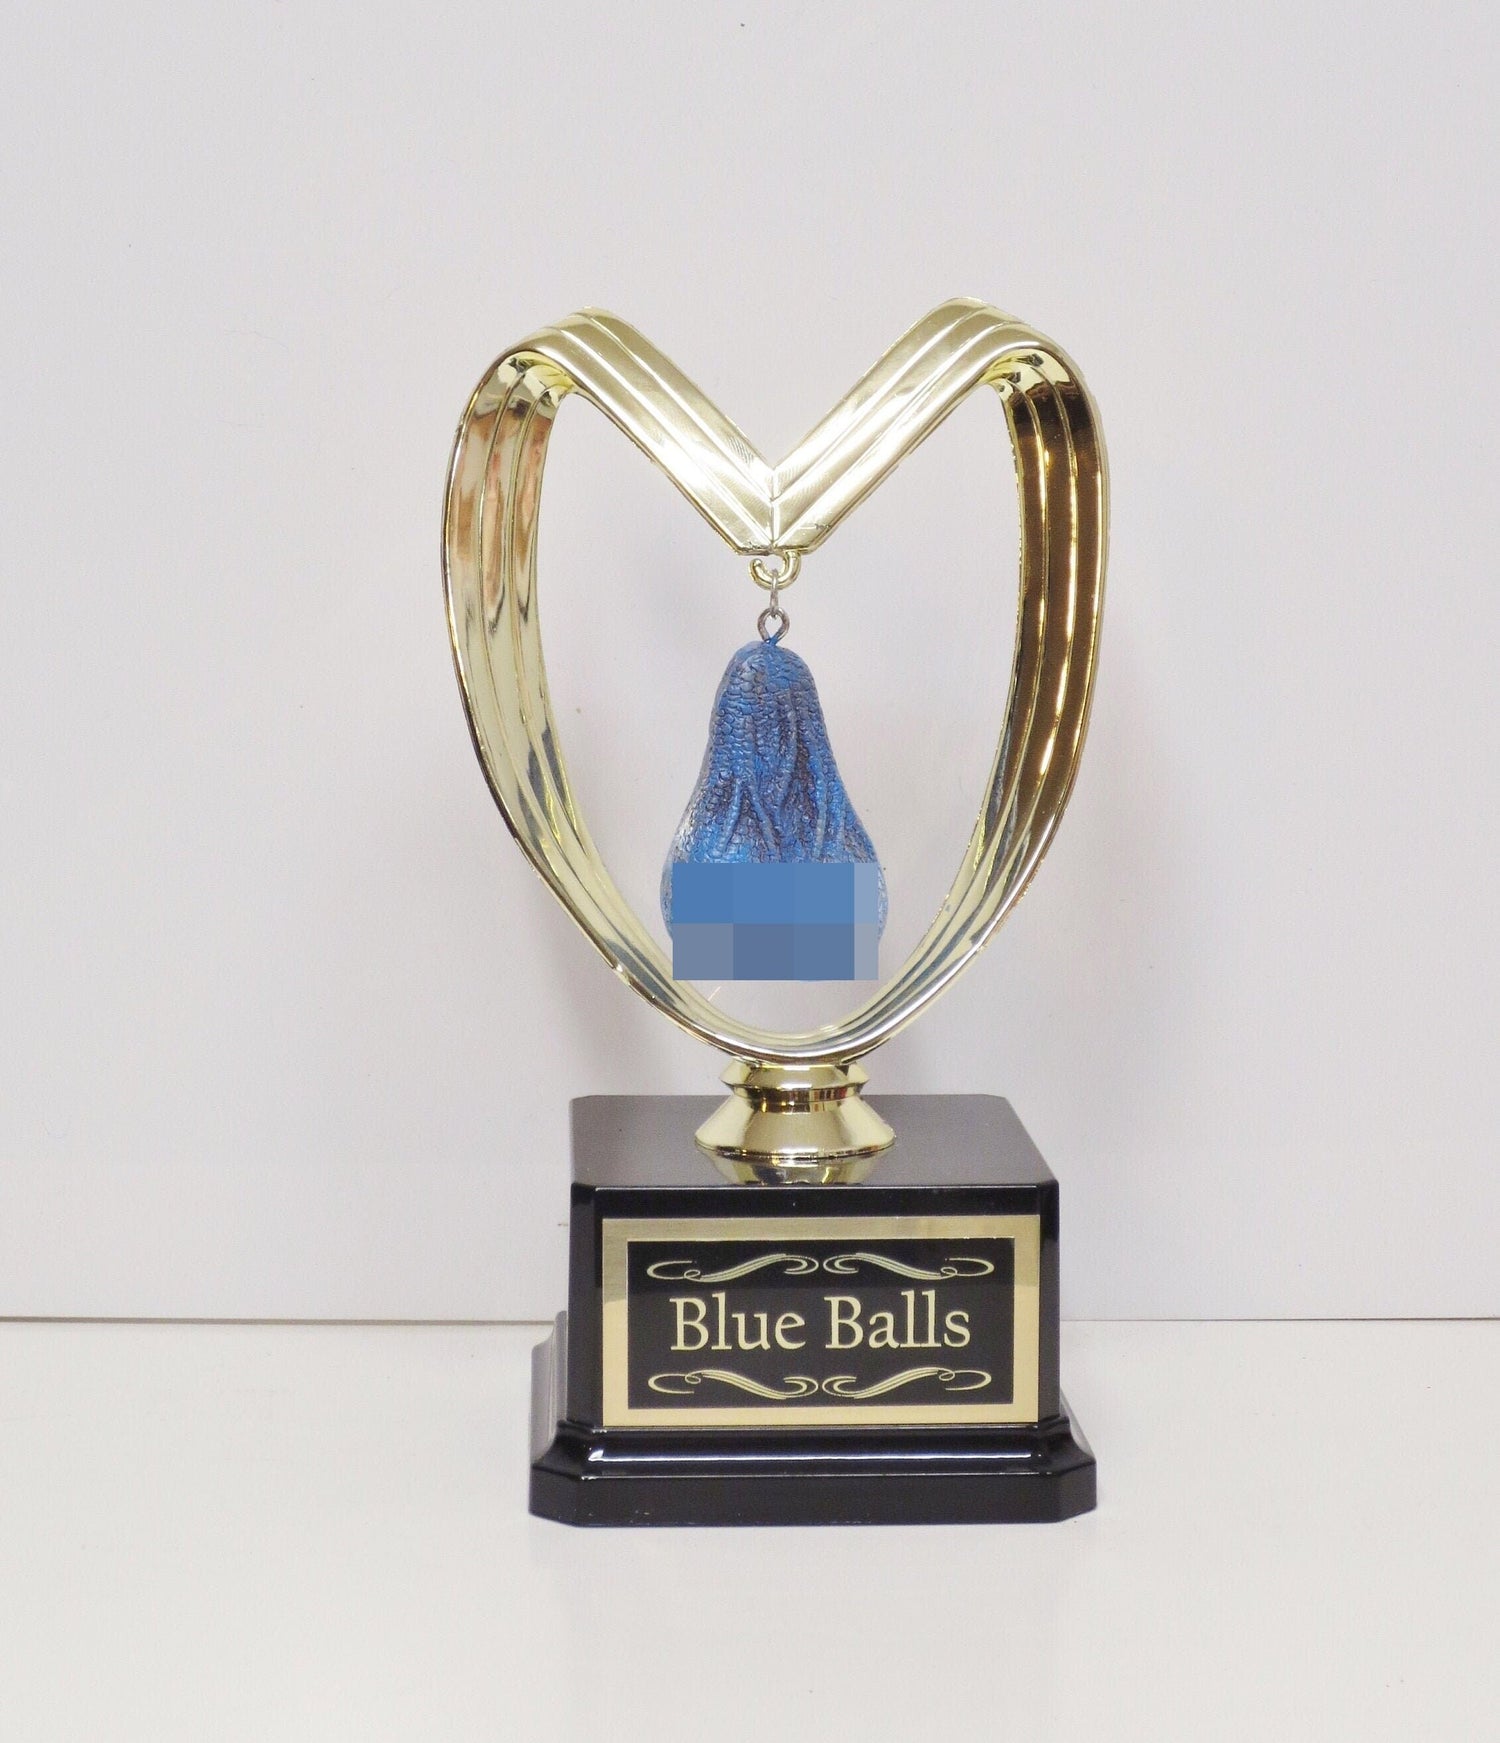 Blue Balls Funny Trophy FFL Trophy You Suck Balls Last Place Loser Grow A Pair Adult Humor Gag Gift Testicle Fantasy Football Sacko